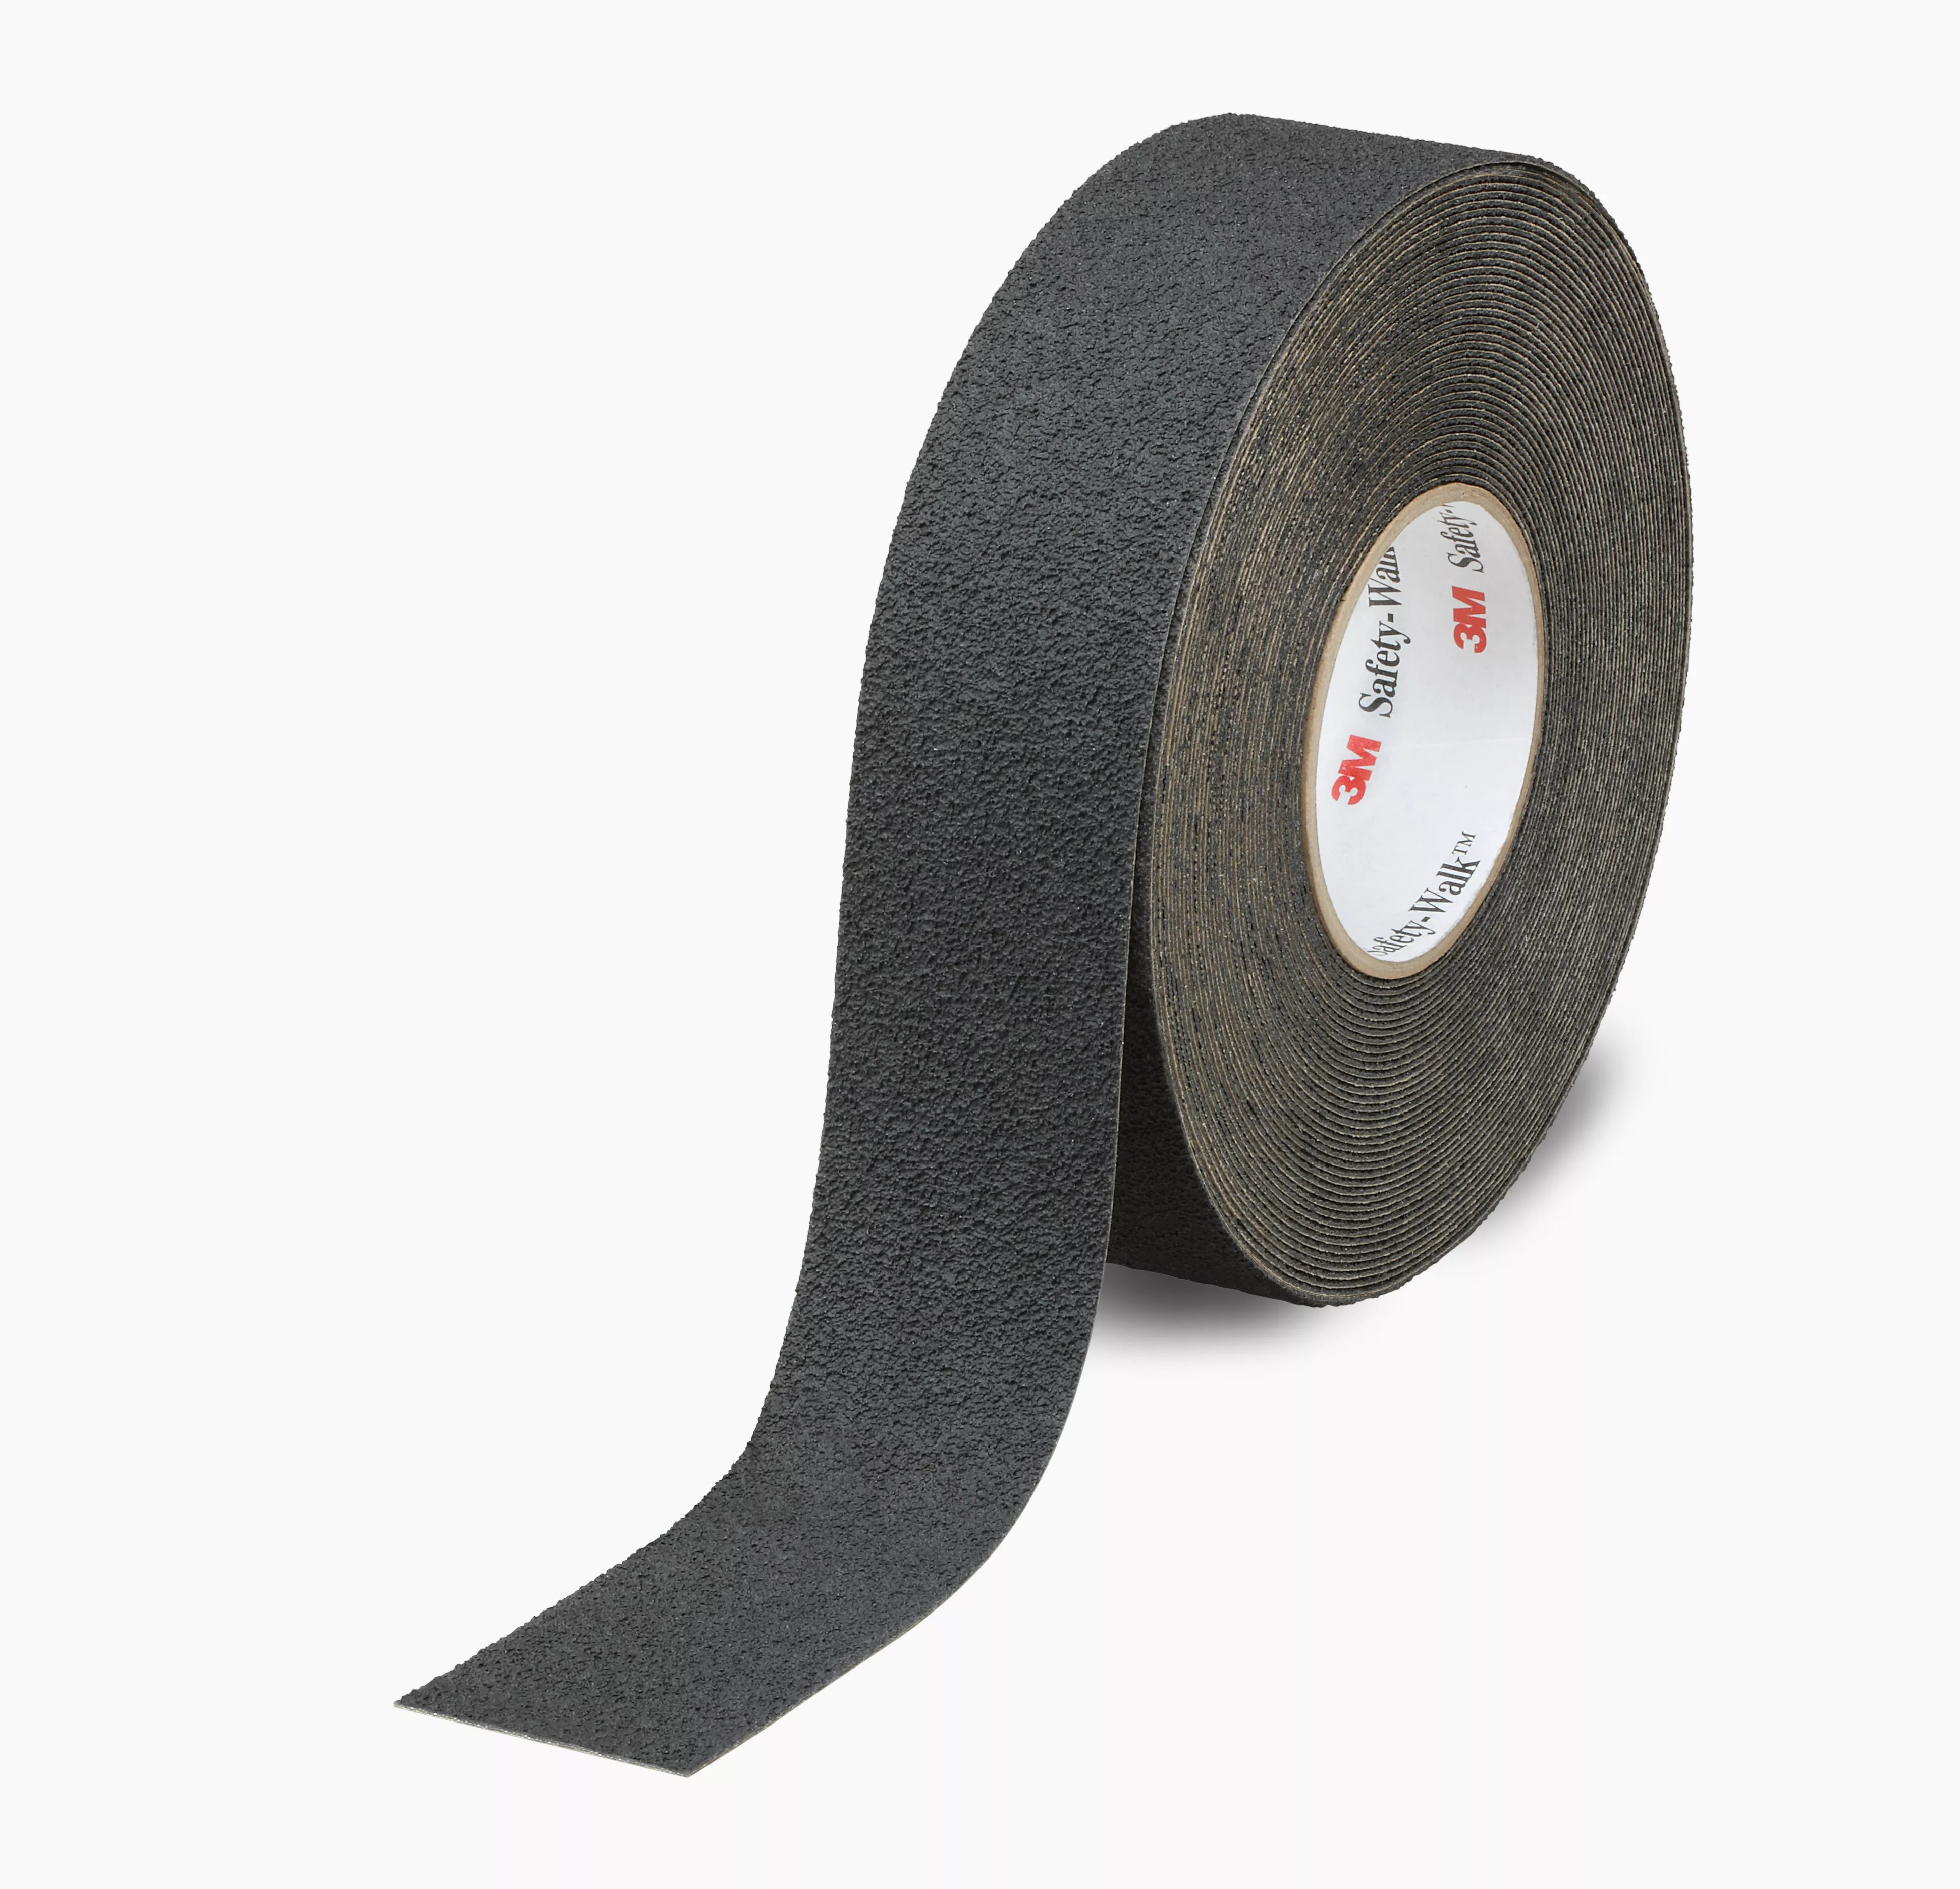 SKU 7100110119 | 3M™ Safety-Walk™ Slip-Resistant Medium Resilient Tapes and Treads 310